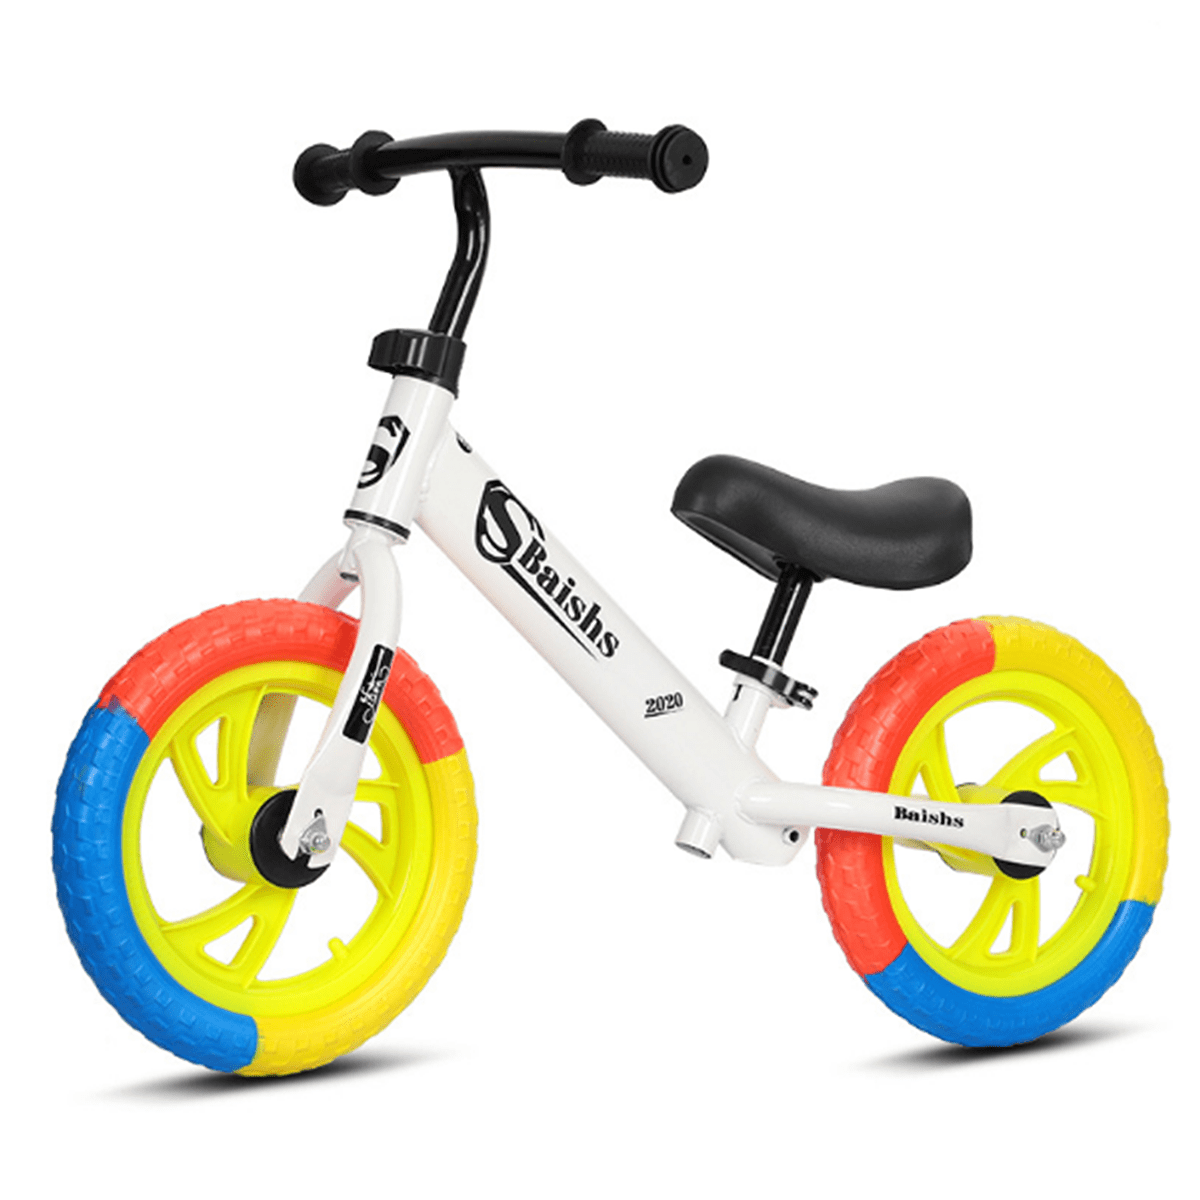 12" Kids Balance Bike Walking Balance Training for Toddlers Ages 2-6 Years Old, Carbon Steel Bicycle Outdoors Sports